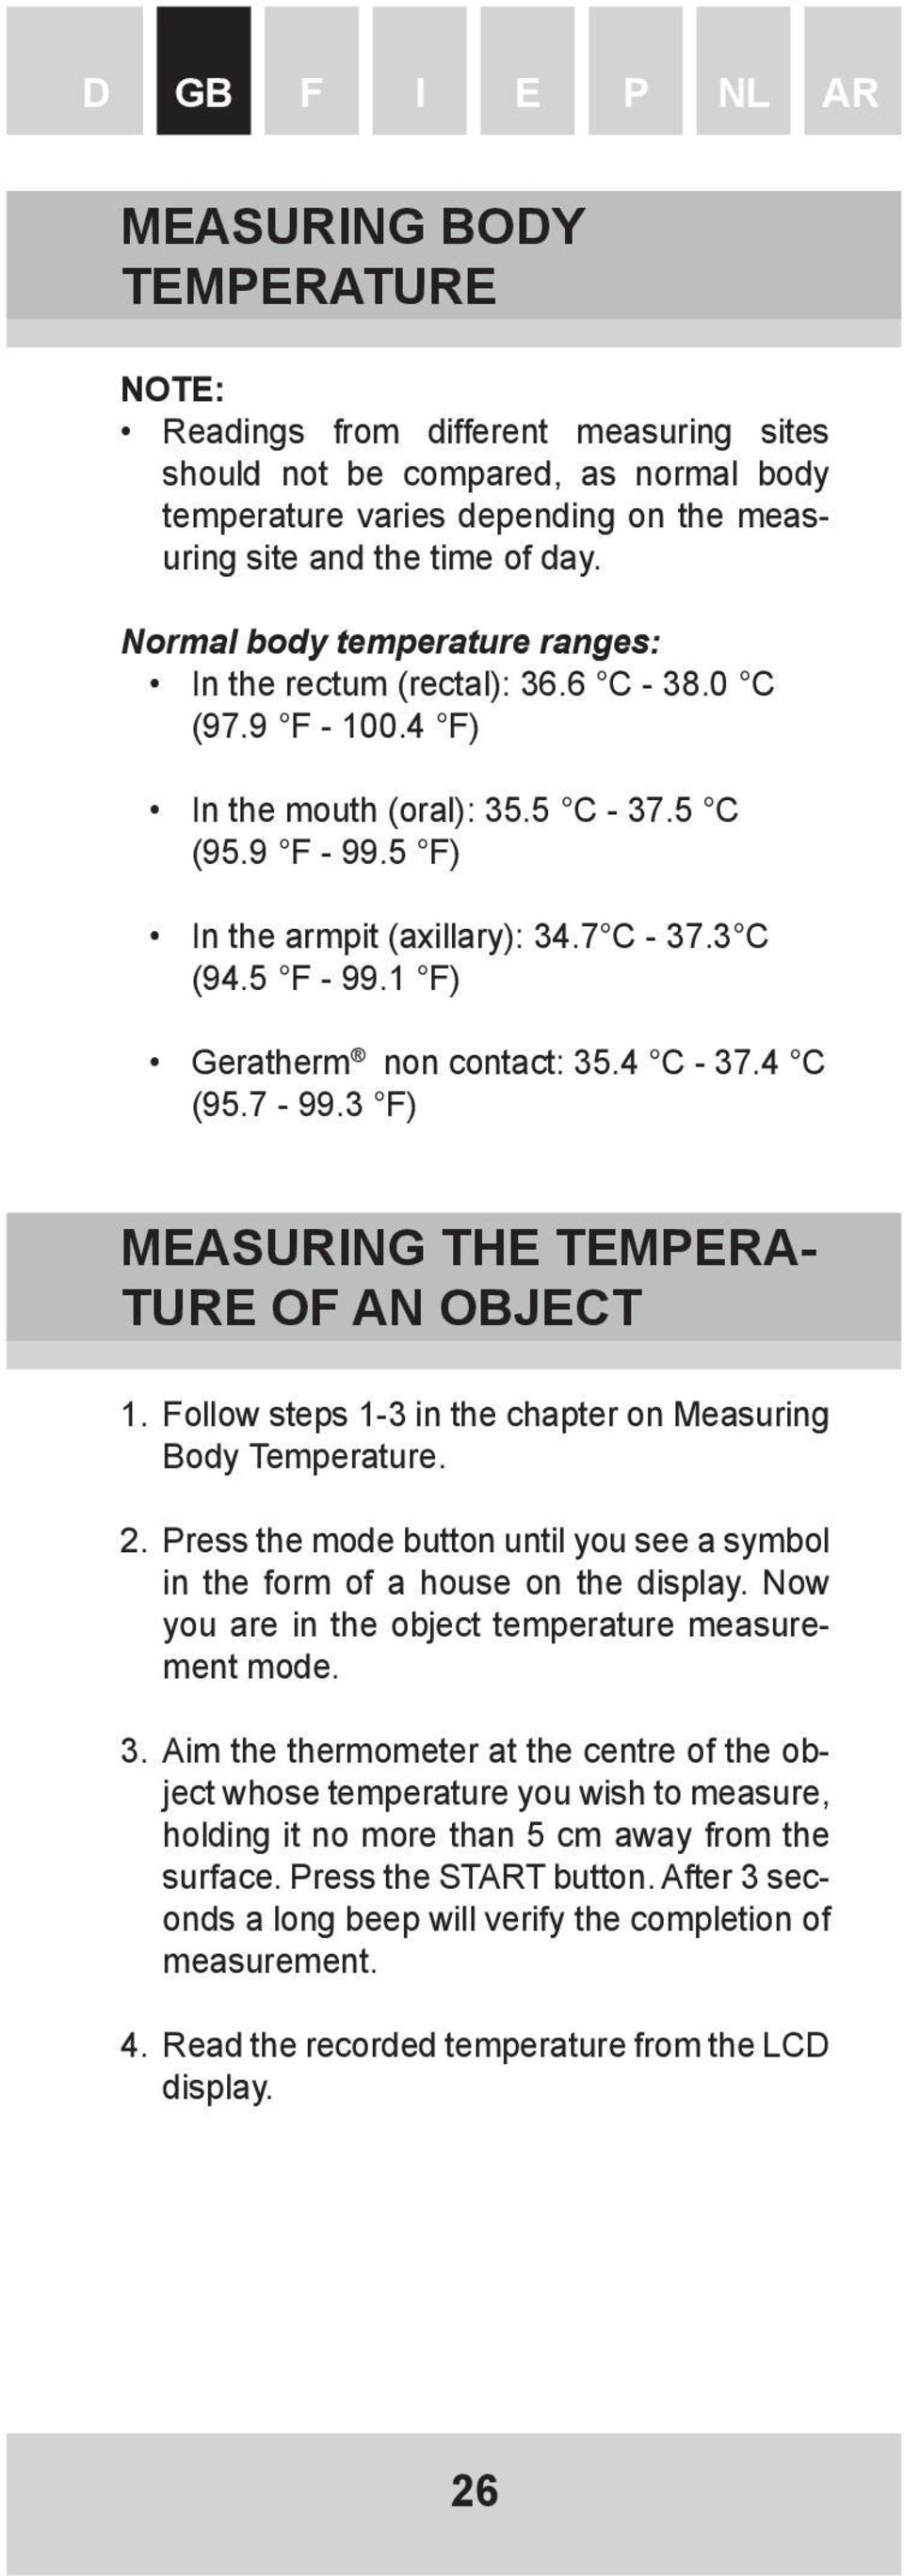 5 F - 99.1 F) Geratherm non contact: 35.4 C - 37.4 C (95.7-99.3 F) MEASURING THE TEMPERA- TURE OF AN OBJECT 1. Follow steps 1-3 in the chapter on Measuring Body Temperature. 2.